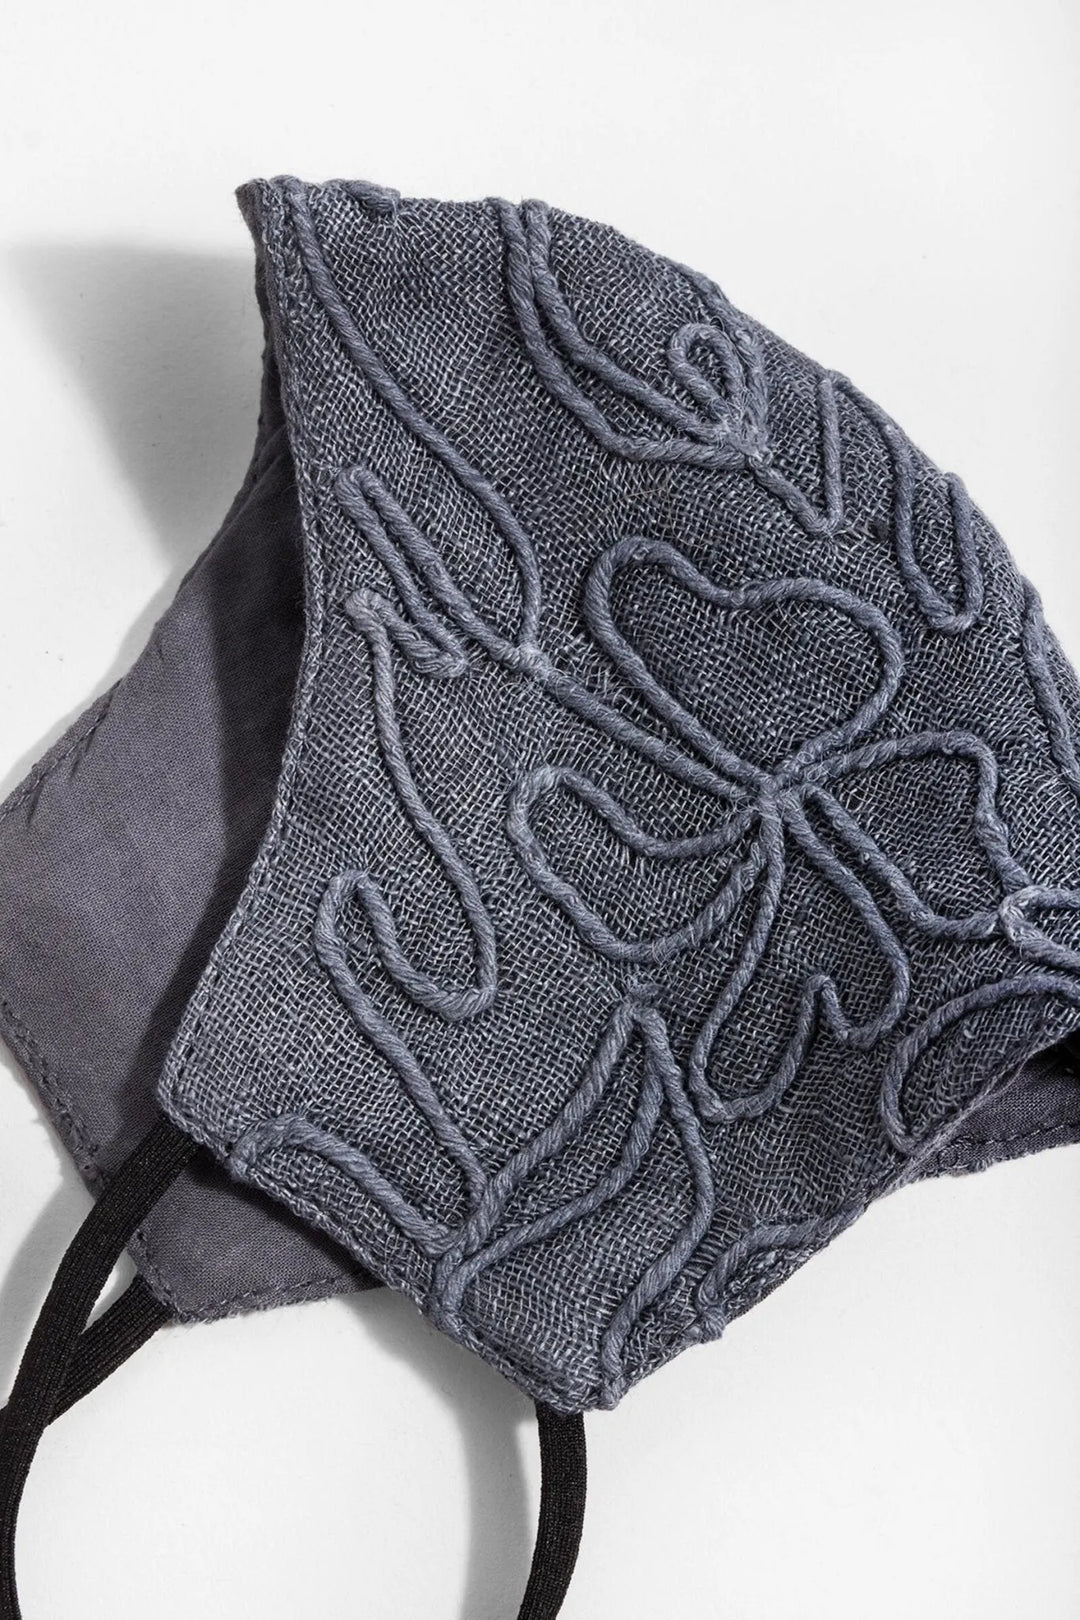 Linen Embroidered Mask Grey